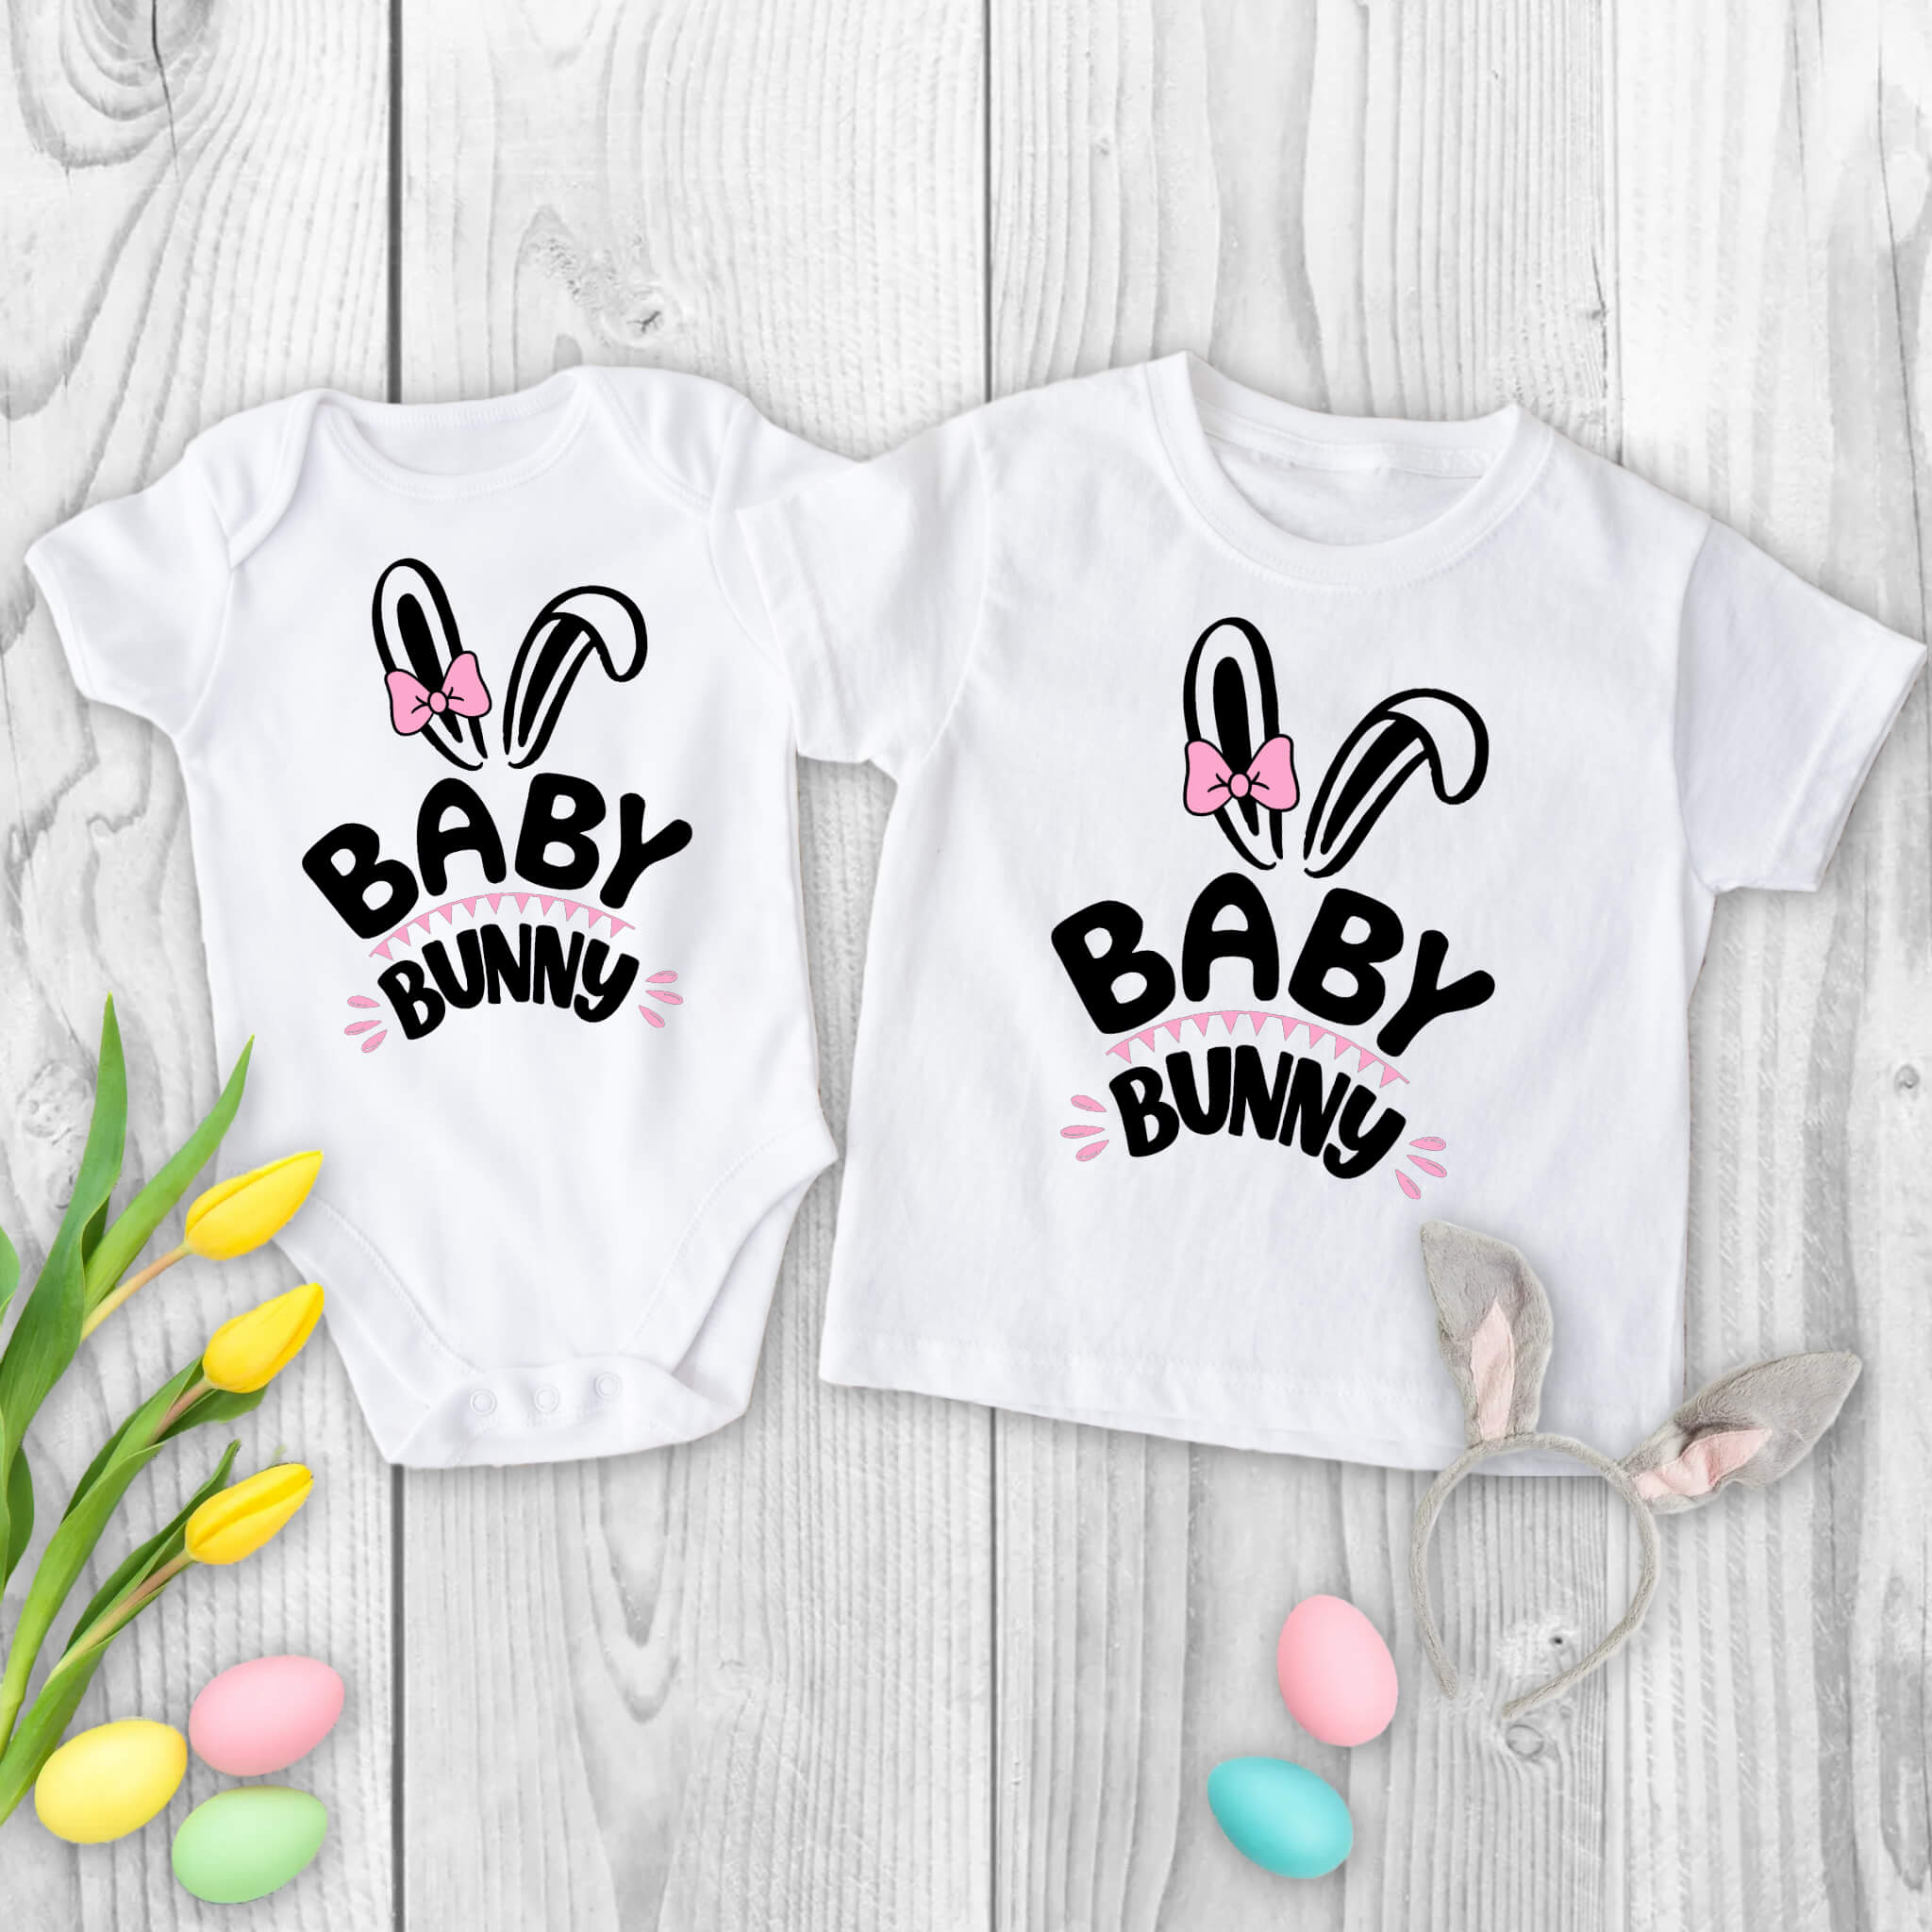 Easter, Baby Bunny Girl’s Onesie, Infant, Cute Girl’s Bunny Outfit, My First Easter, Customized, Personalized, Little Bunny T-Shirt